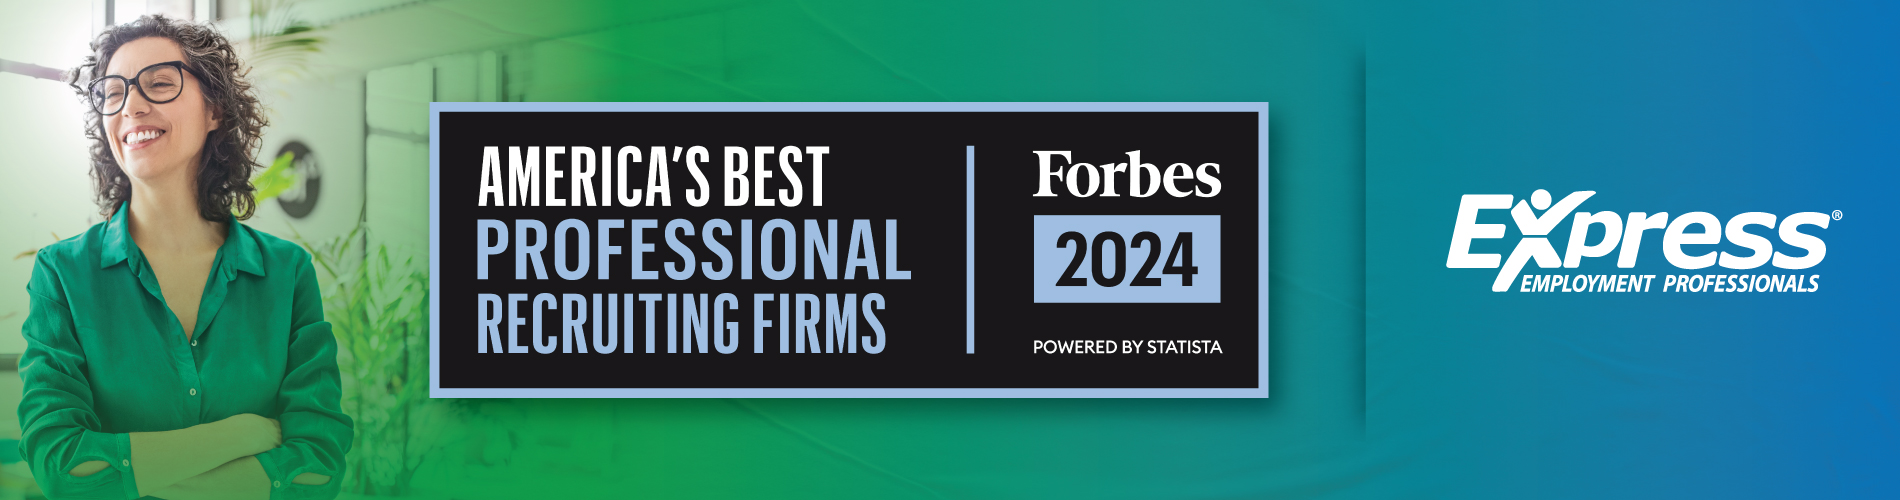 Forbes Best Professional Recruiting Firm - 2024